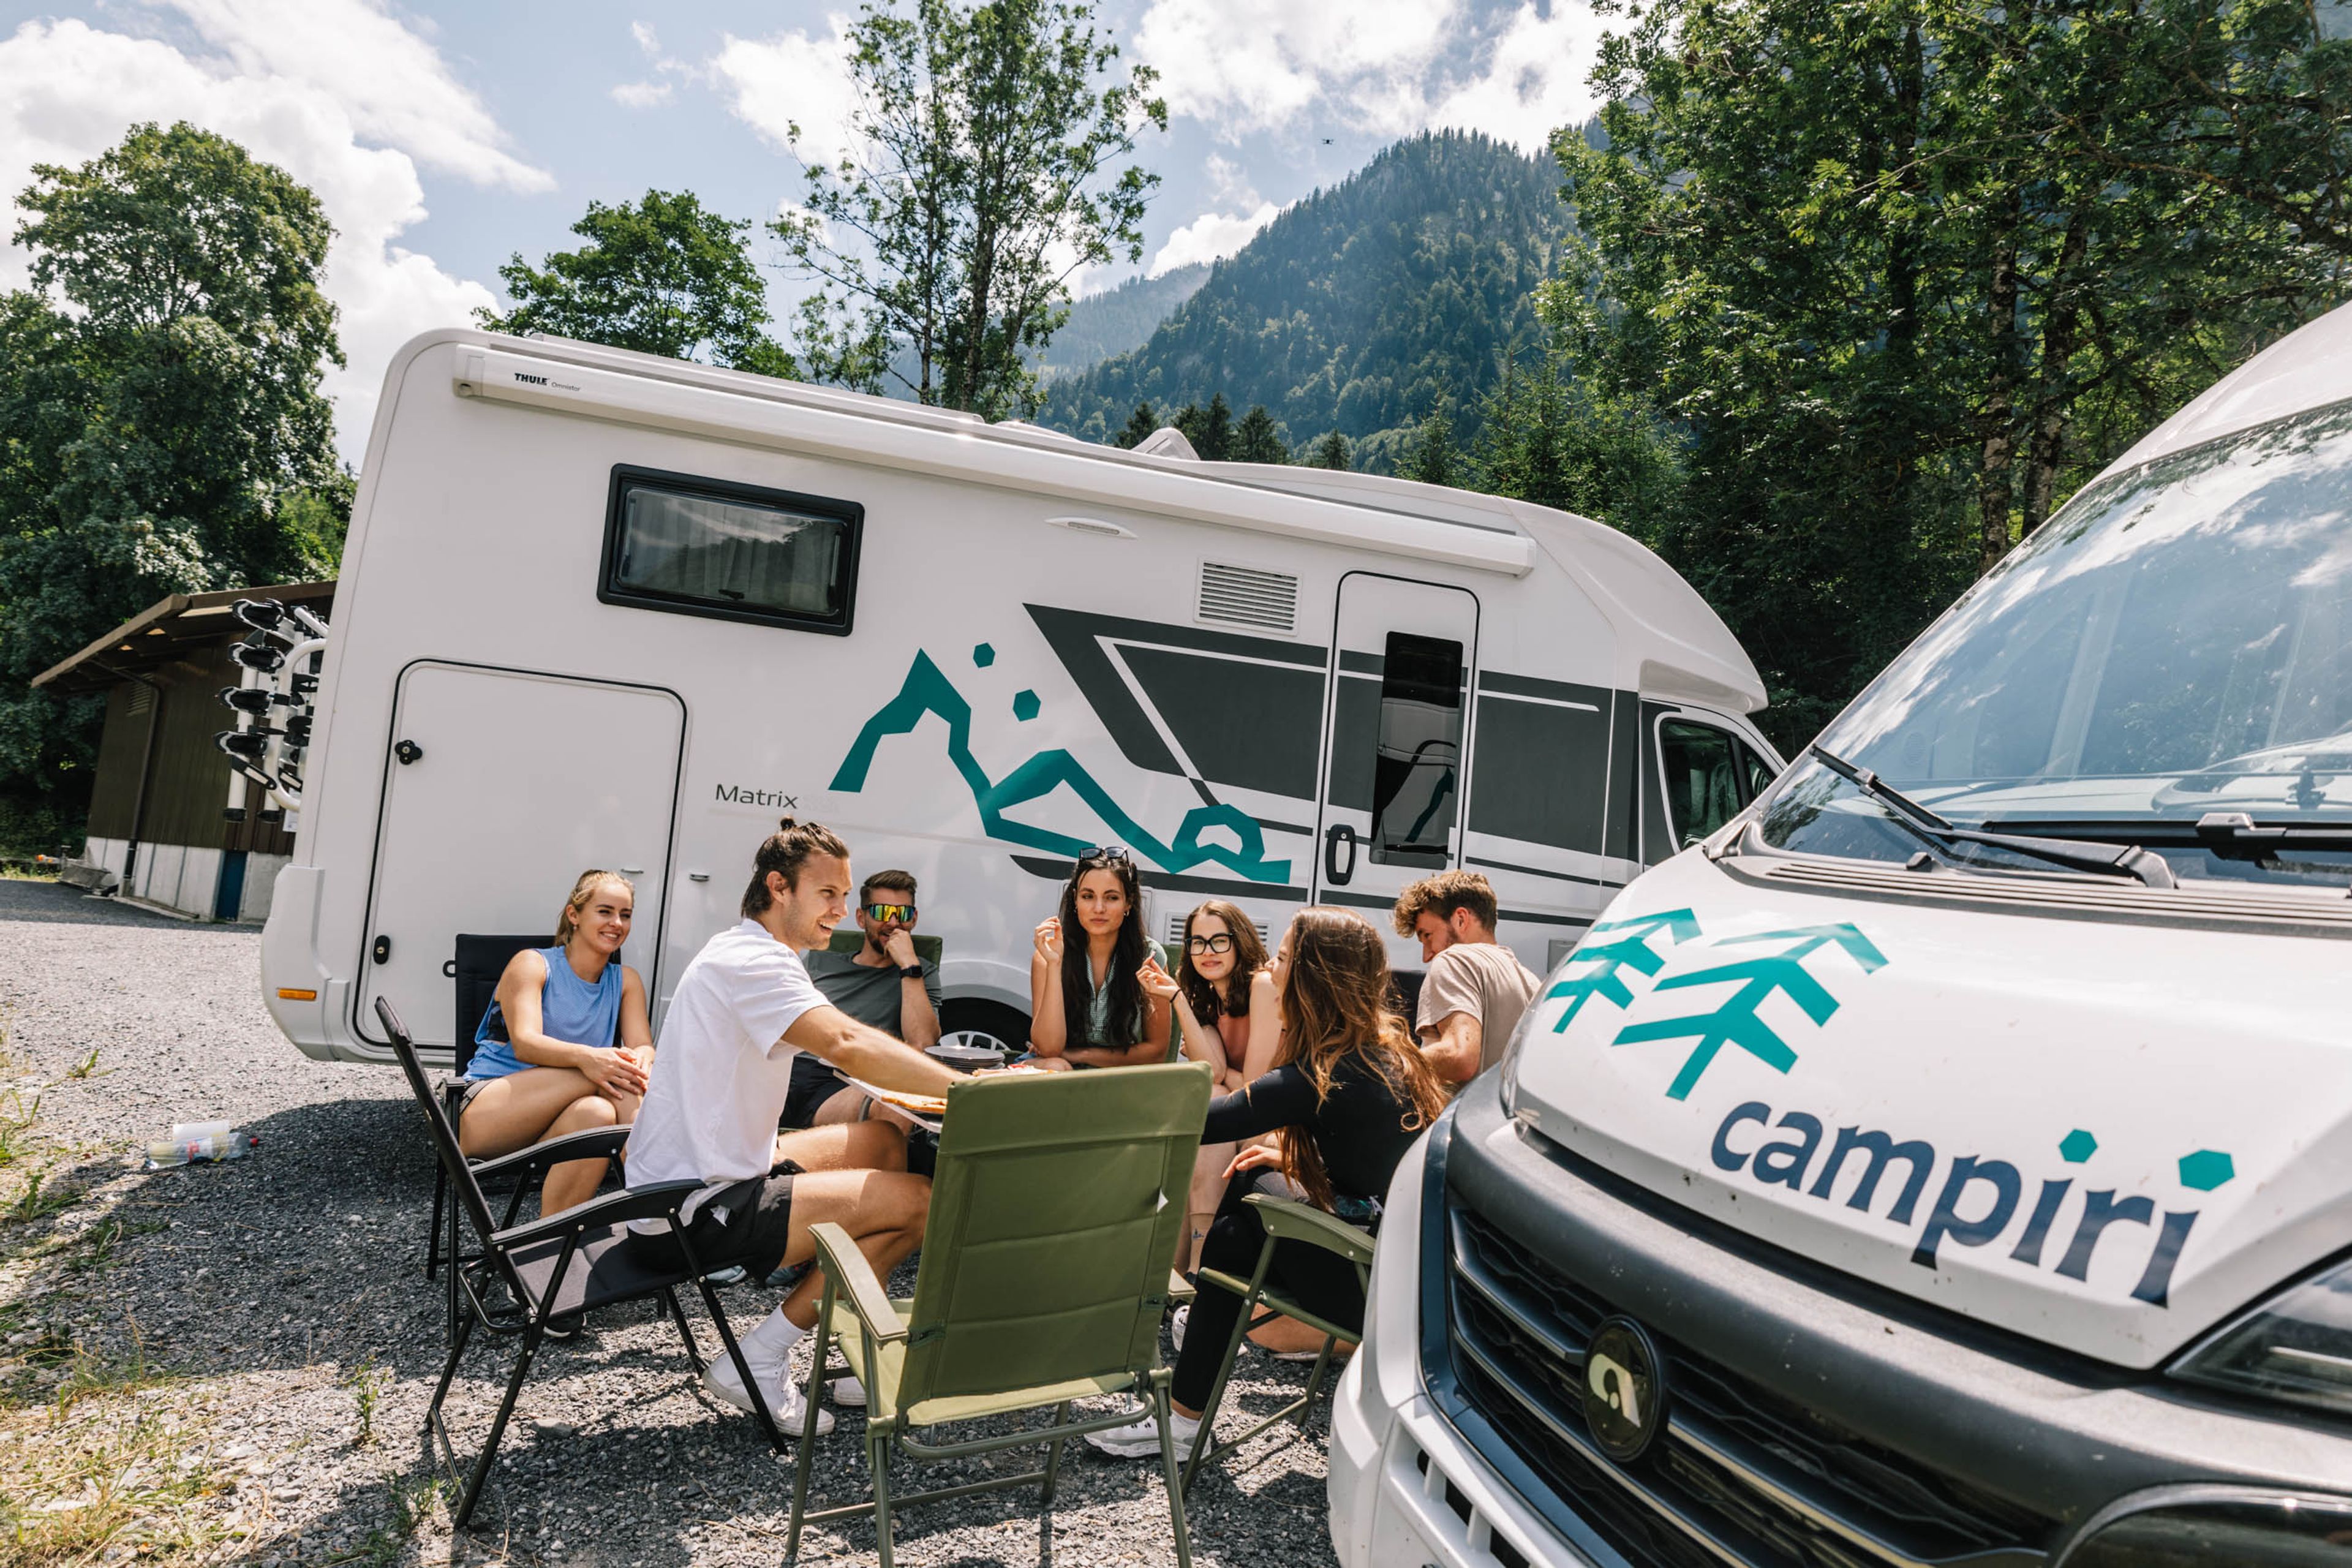 Is vanlife just a trend?